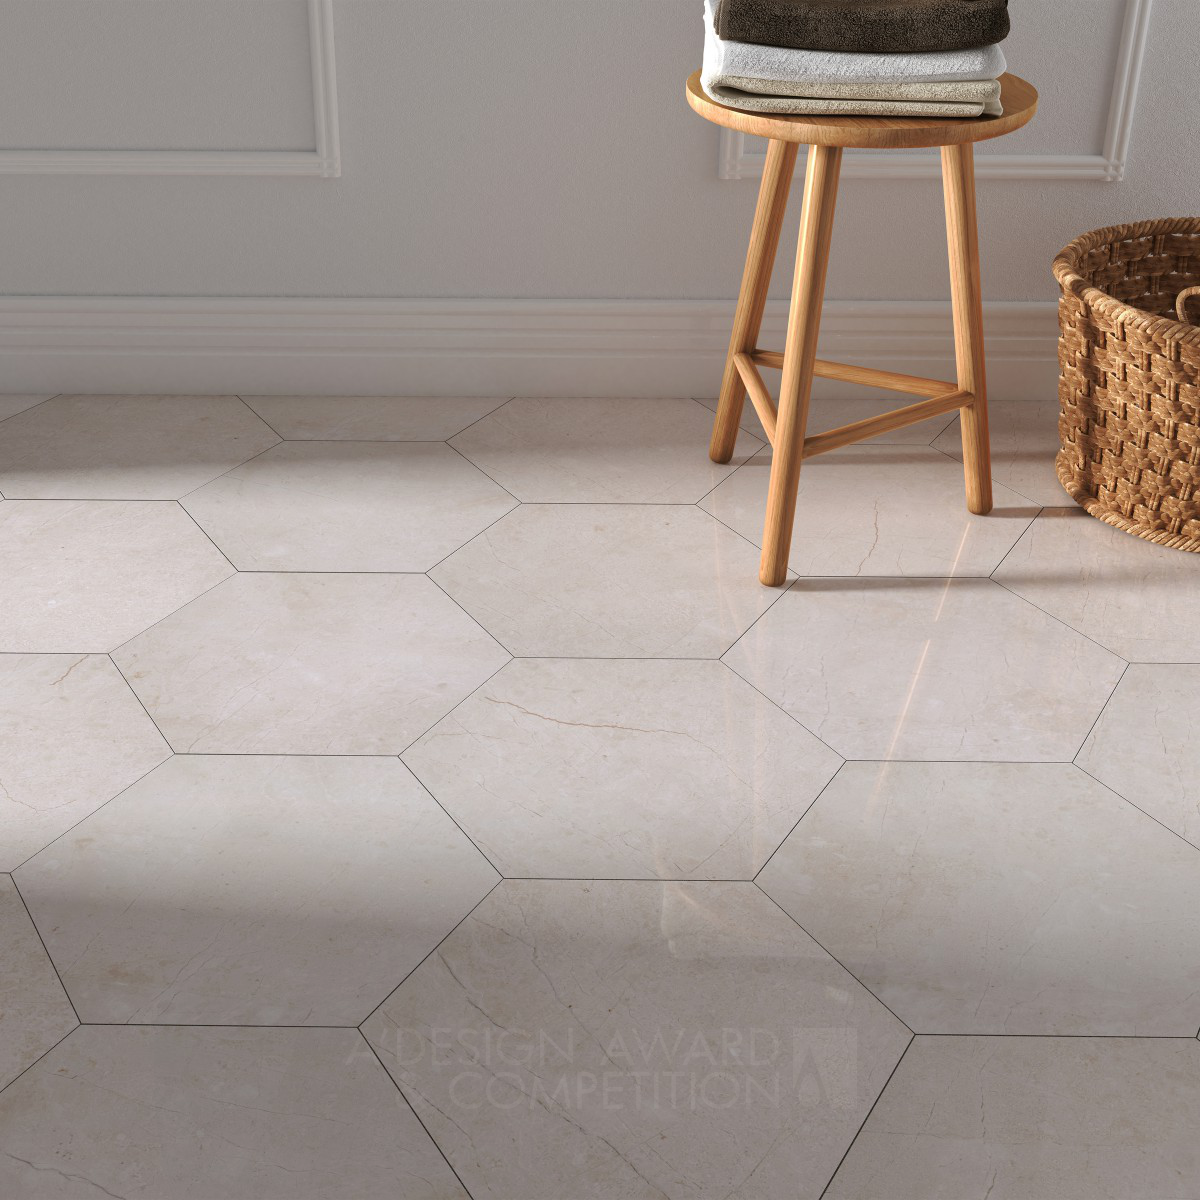 Marble Hexagon Tile Covering Material by Celil Kilinc